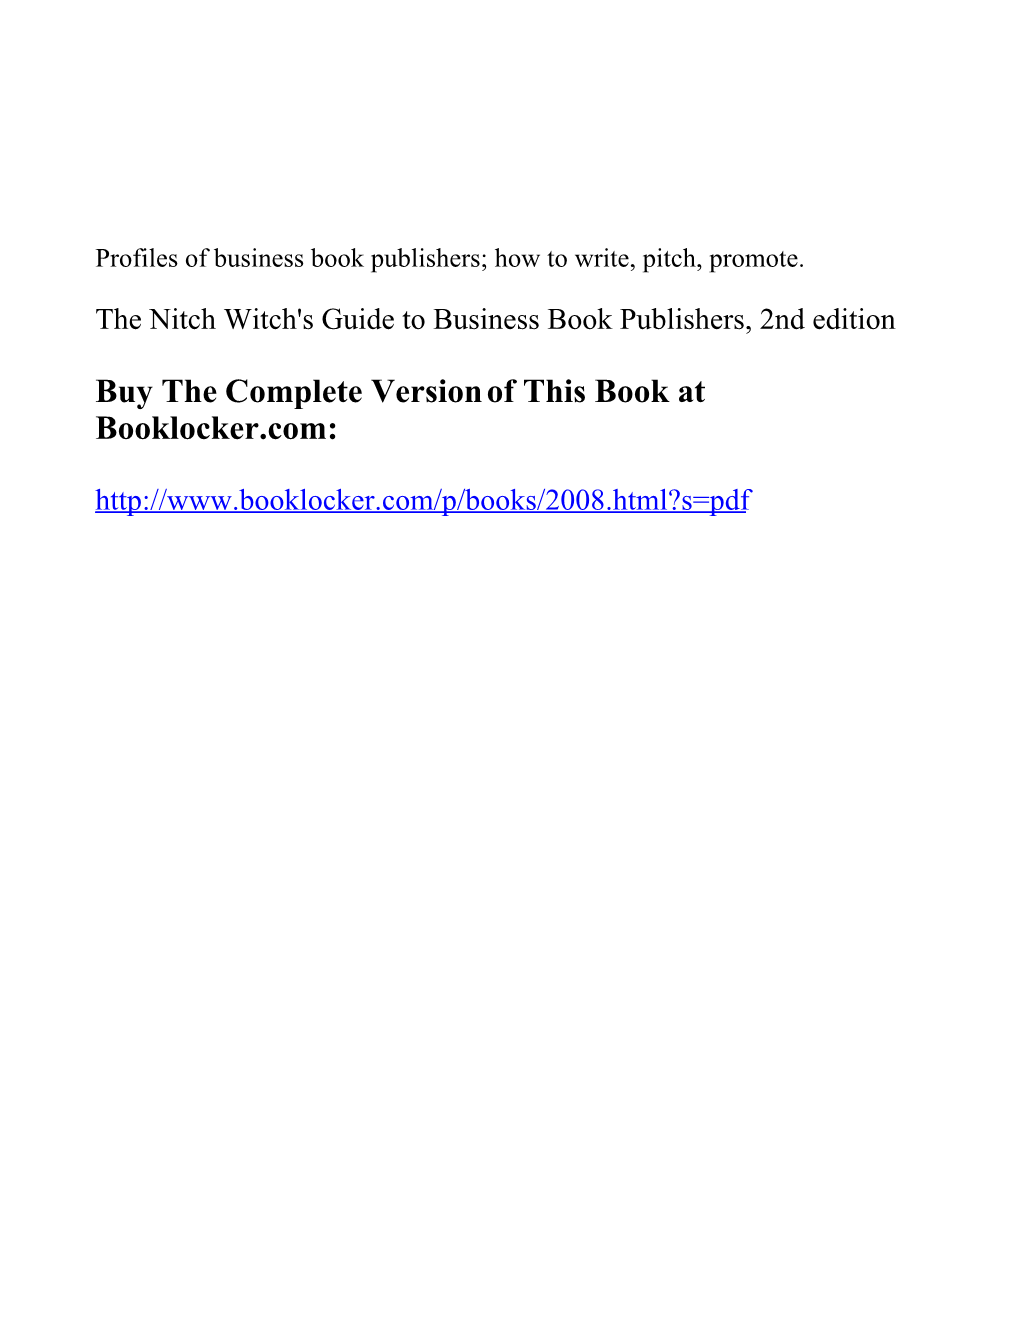 The Nitch Witch's Guide to Business Book Publishers, 2Nd Edition